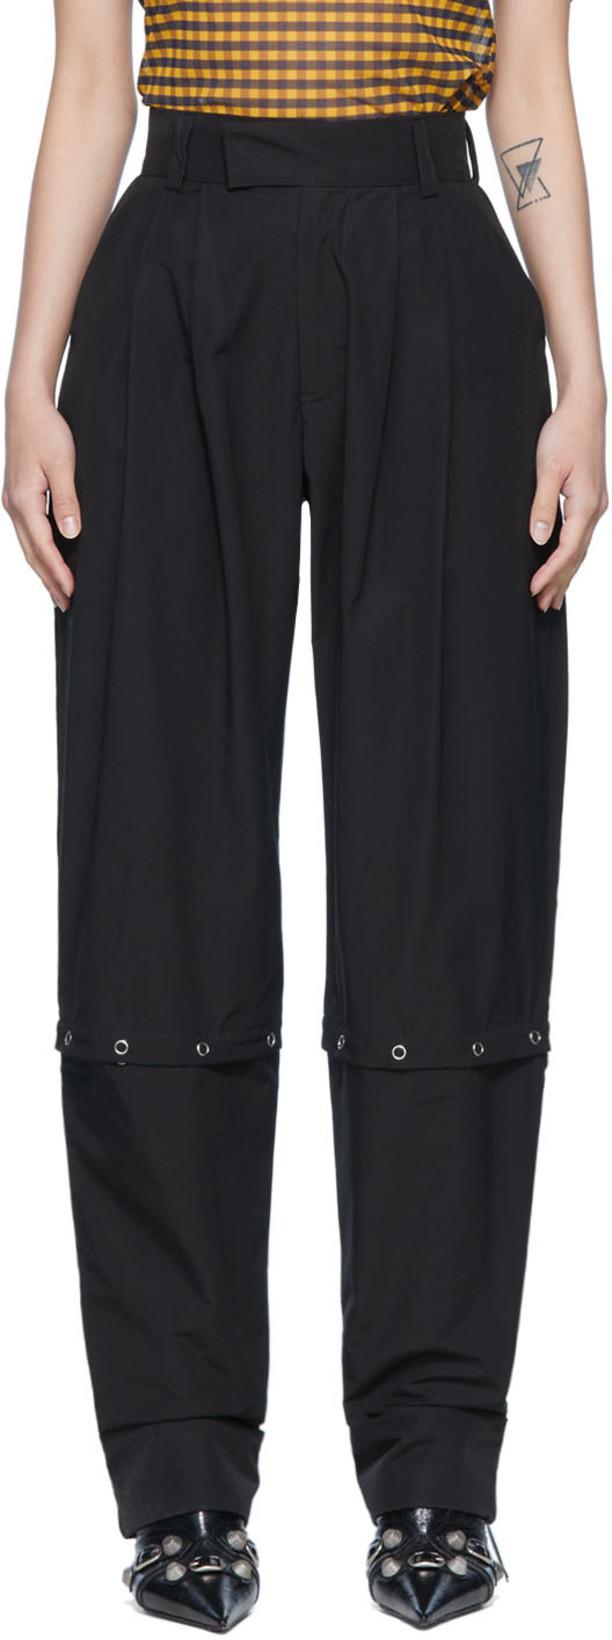 Black Cotton Trousers by BARRAGAN